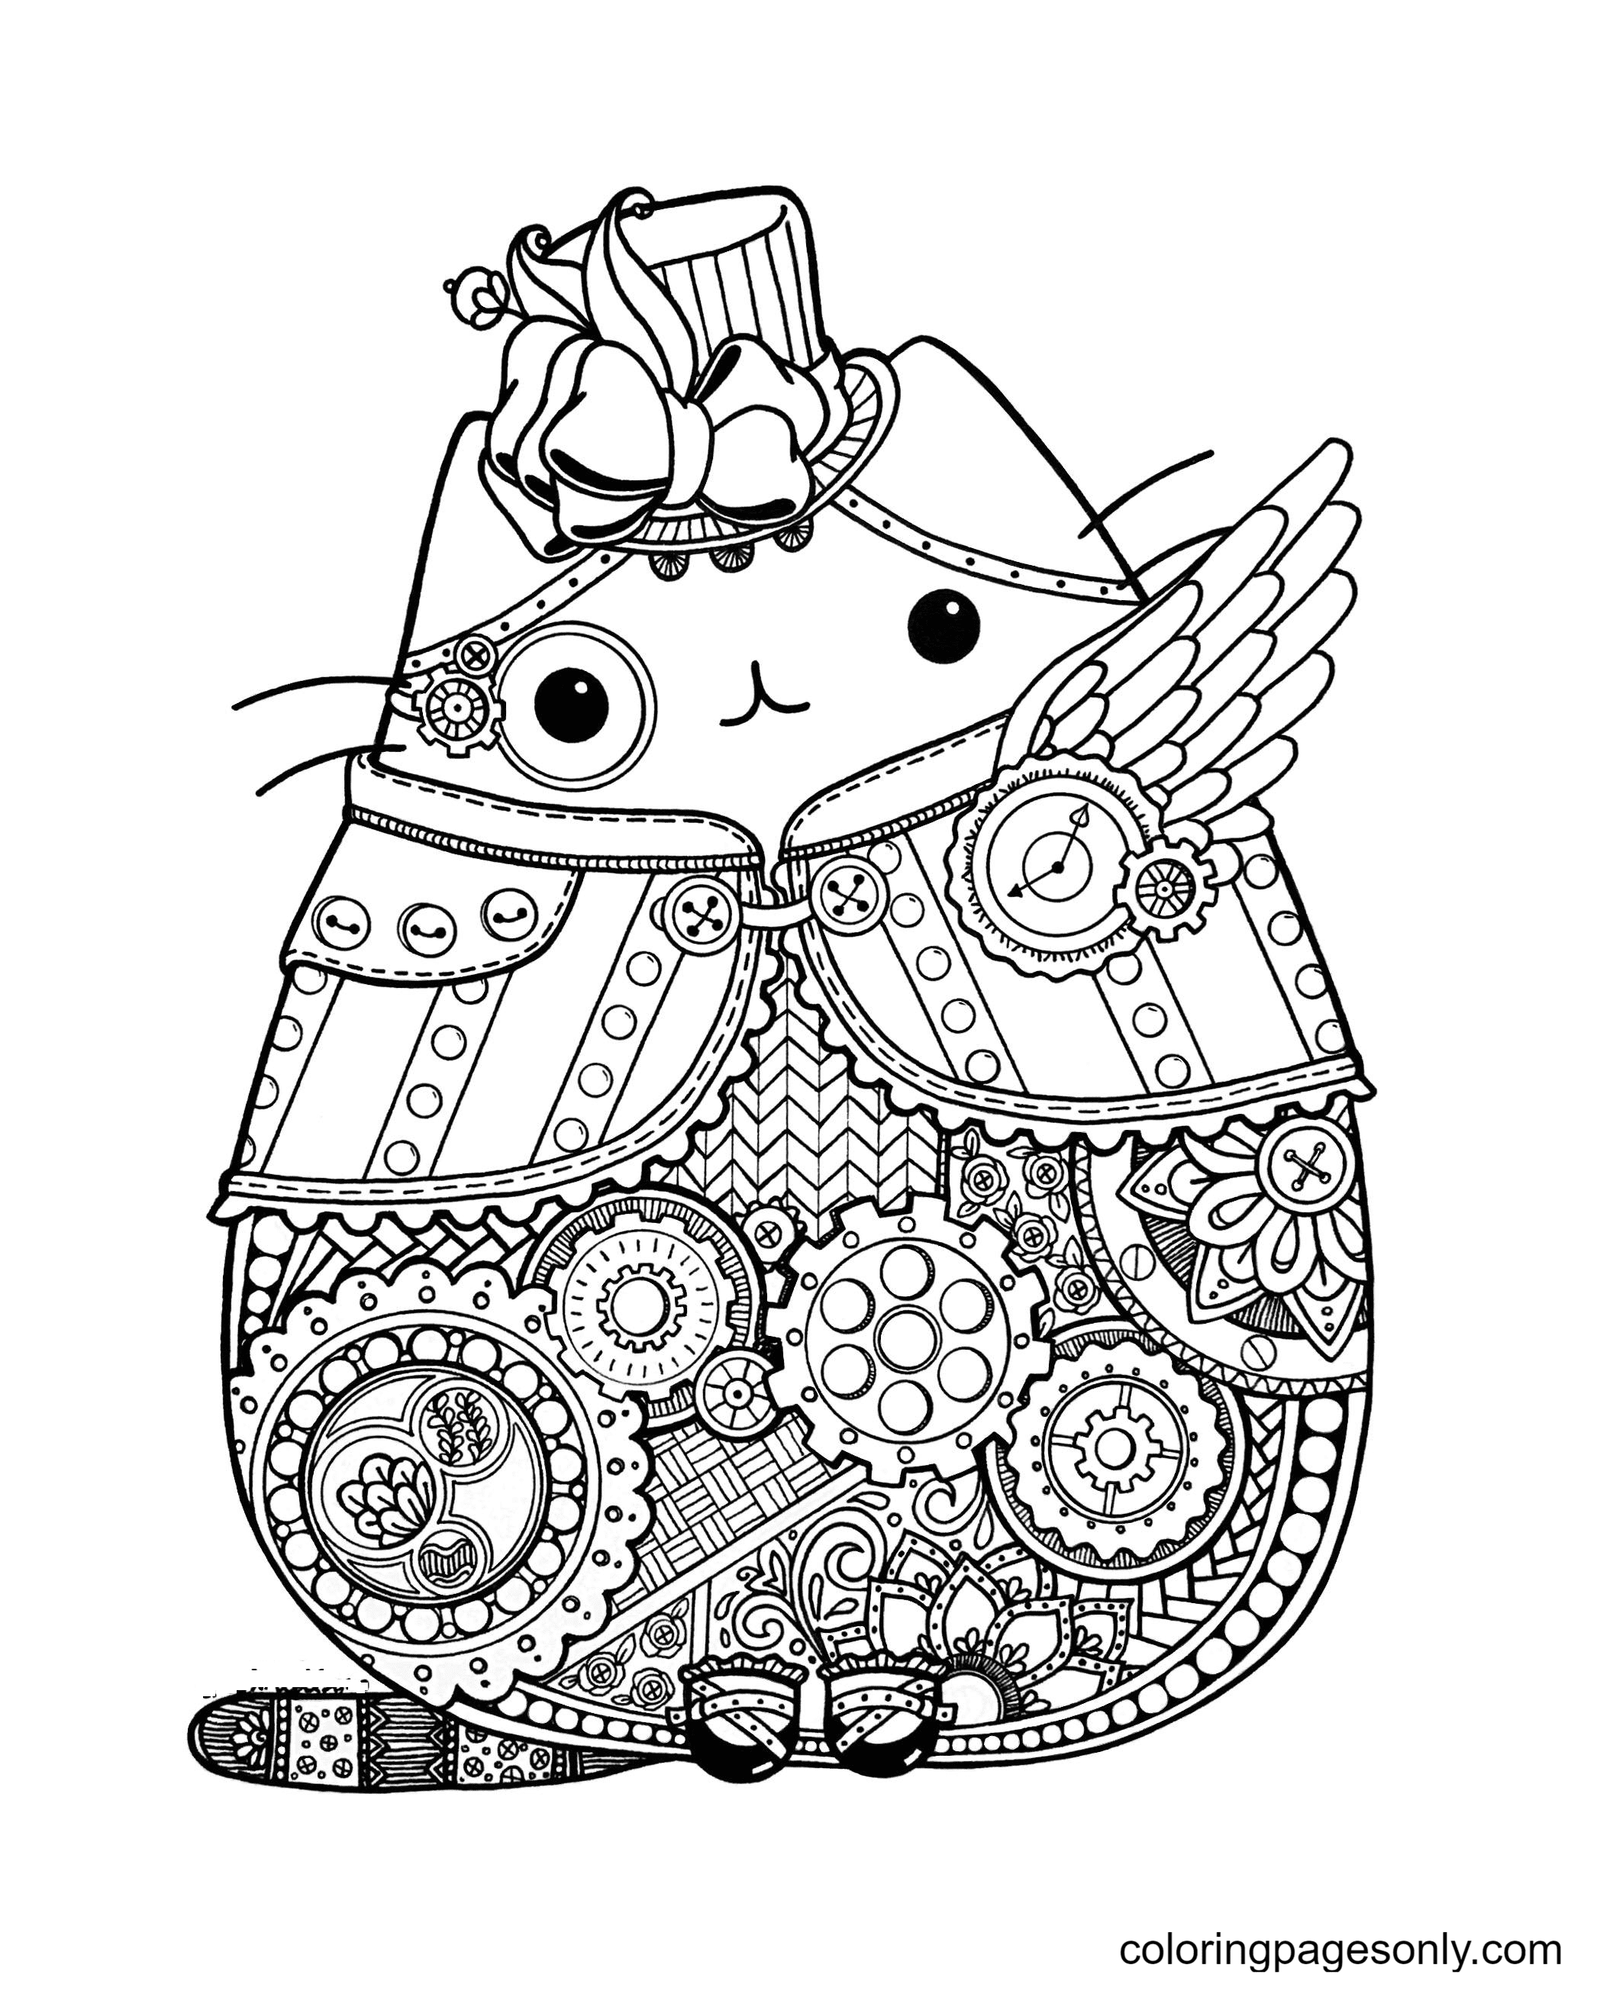 Pusheen coloring pages printable for free download